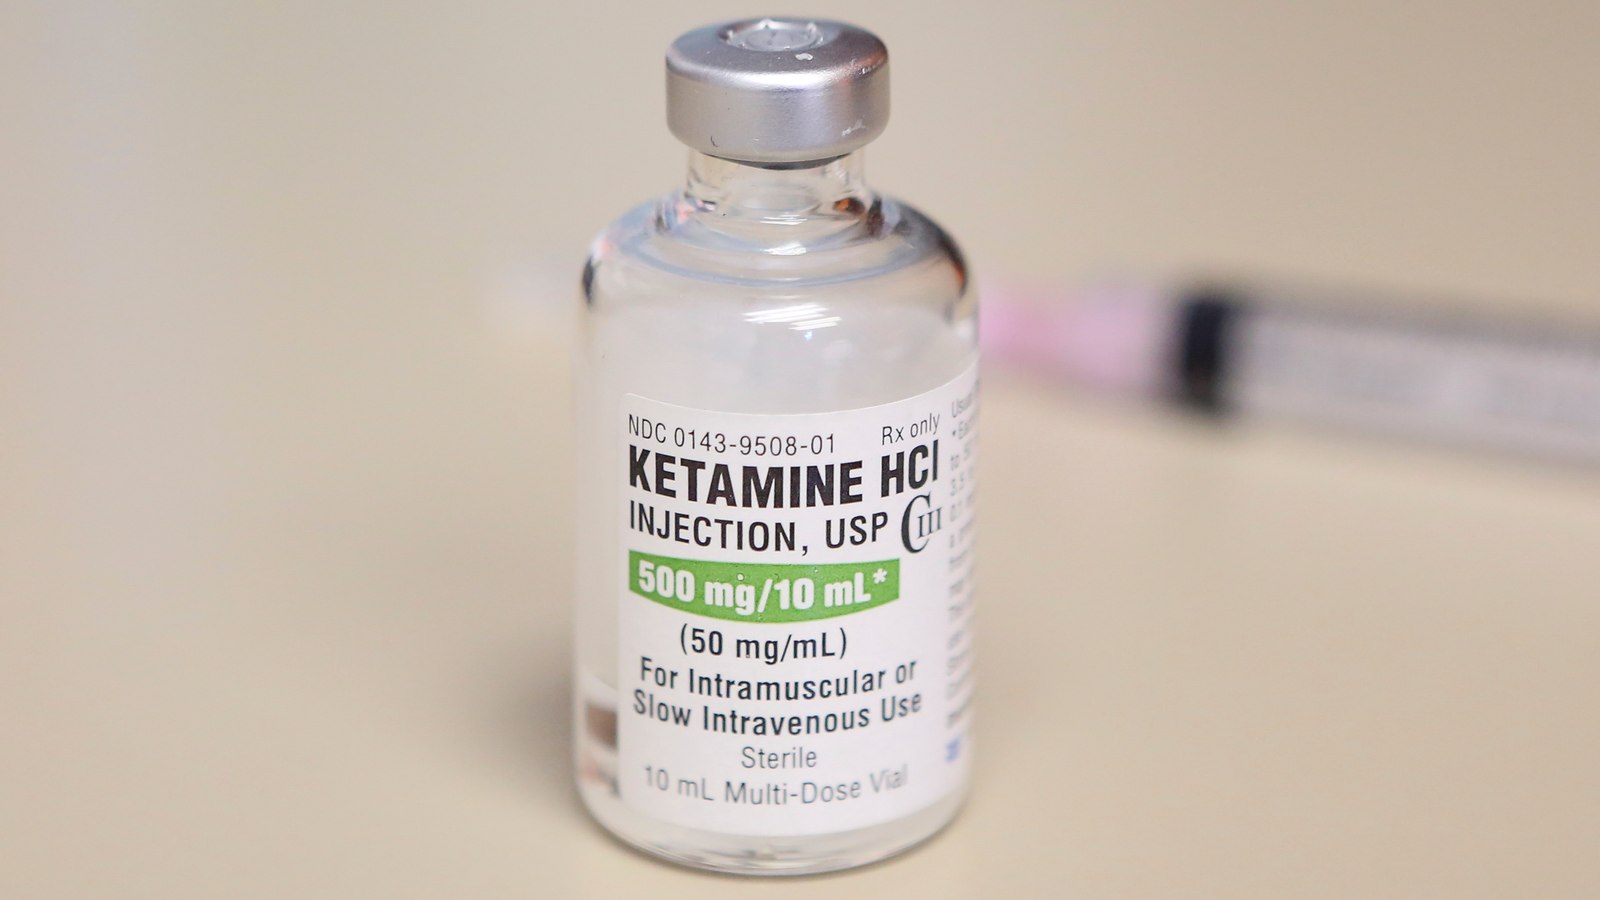 things coworkers did that shouldve gotten them fired - liquid - Ndc 0143950801 Ketamine Hc Injection, Usp 500 mg10 mL Rx only U 50 mgmL For Intramuscular or Slow Intravenous Sterile Use 10 mL MultiDose Vial